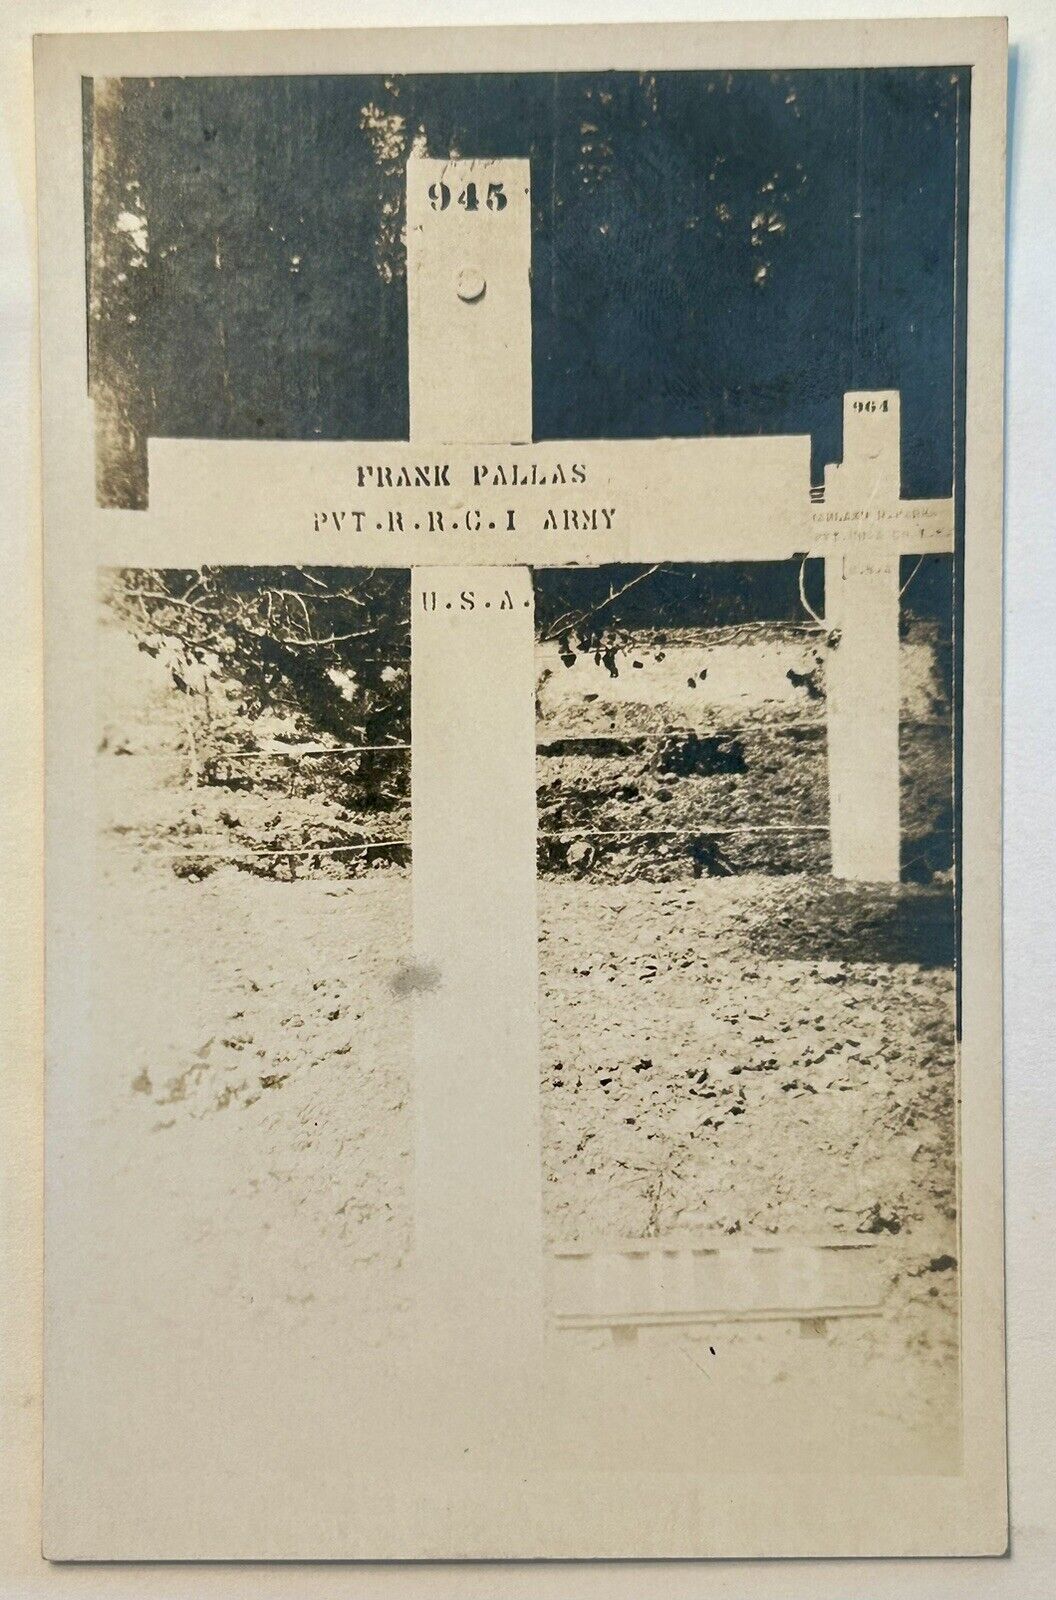 Luxembourg American Cemetery. US Army. Real Photo Postcard Frank Pallas. RPPC